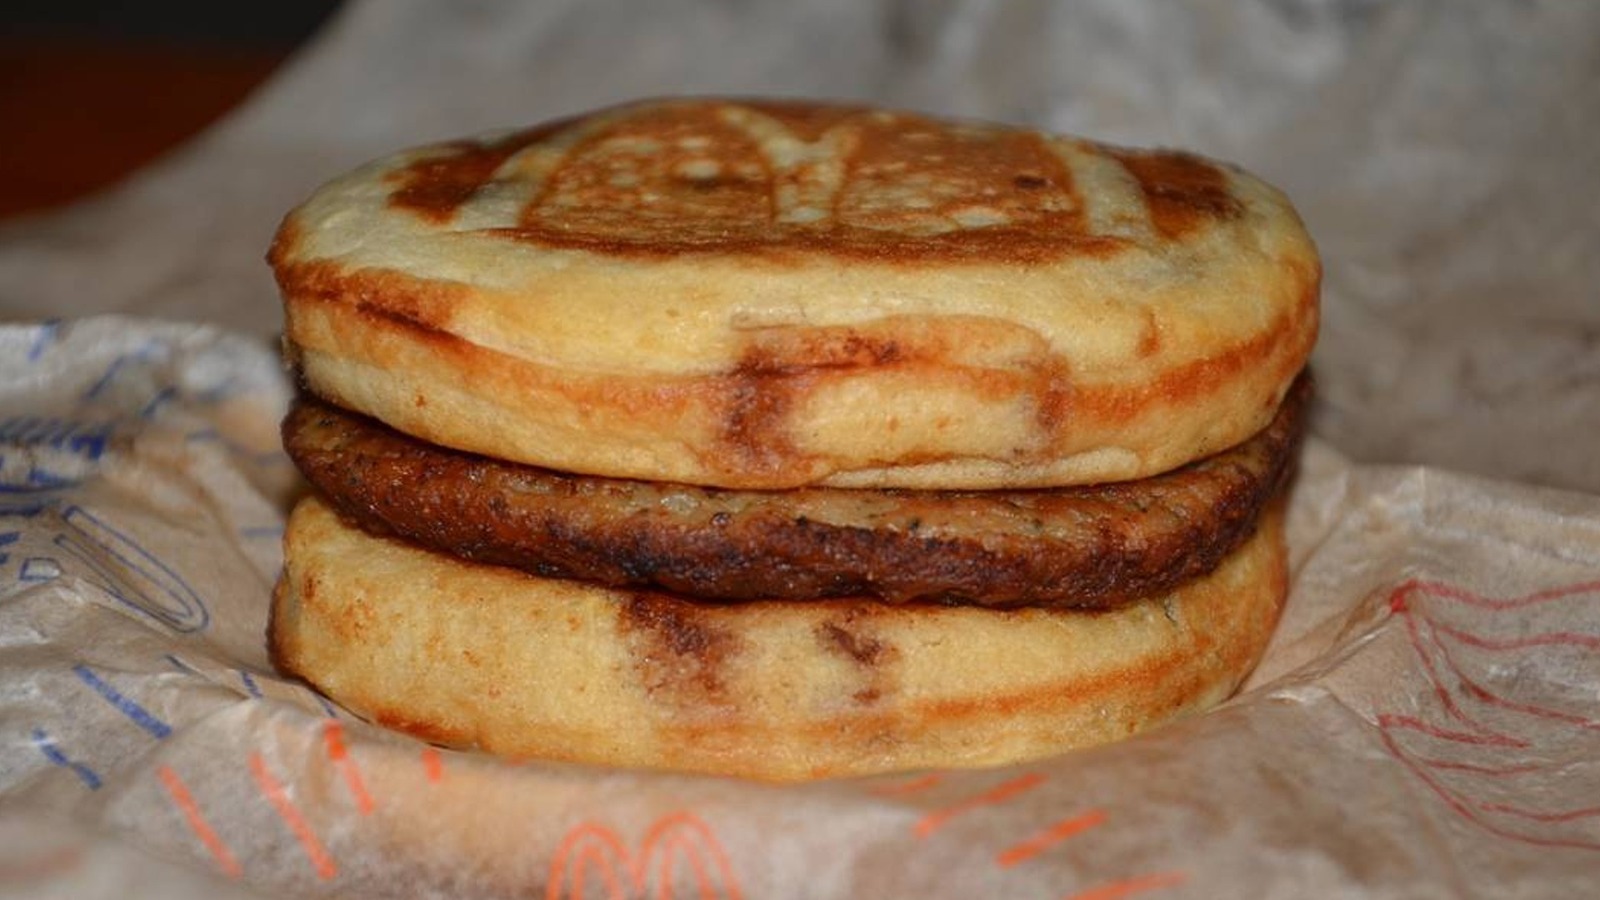 Trader Joe's Has A Pretty Convincing McDonald's McGriddle Cake Copycat - Daily Meal